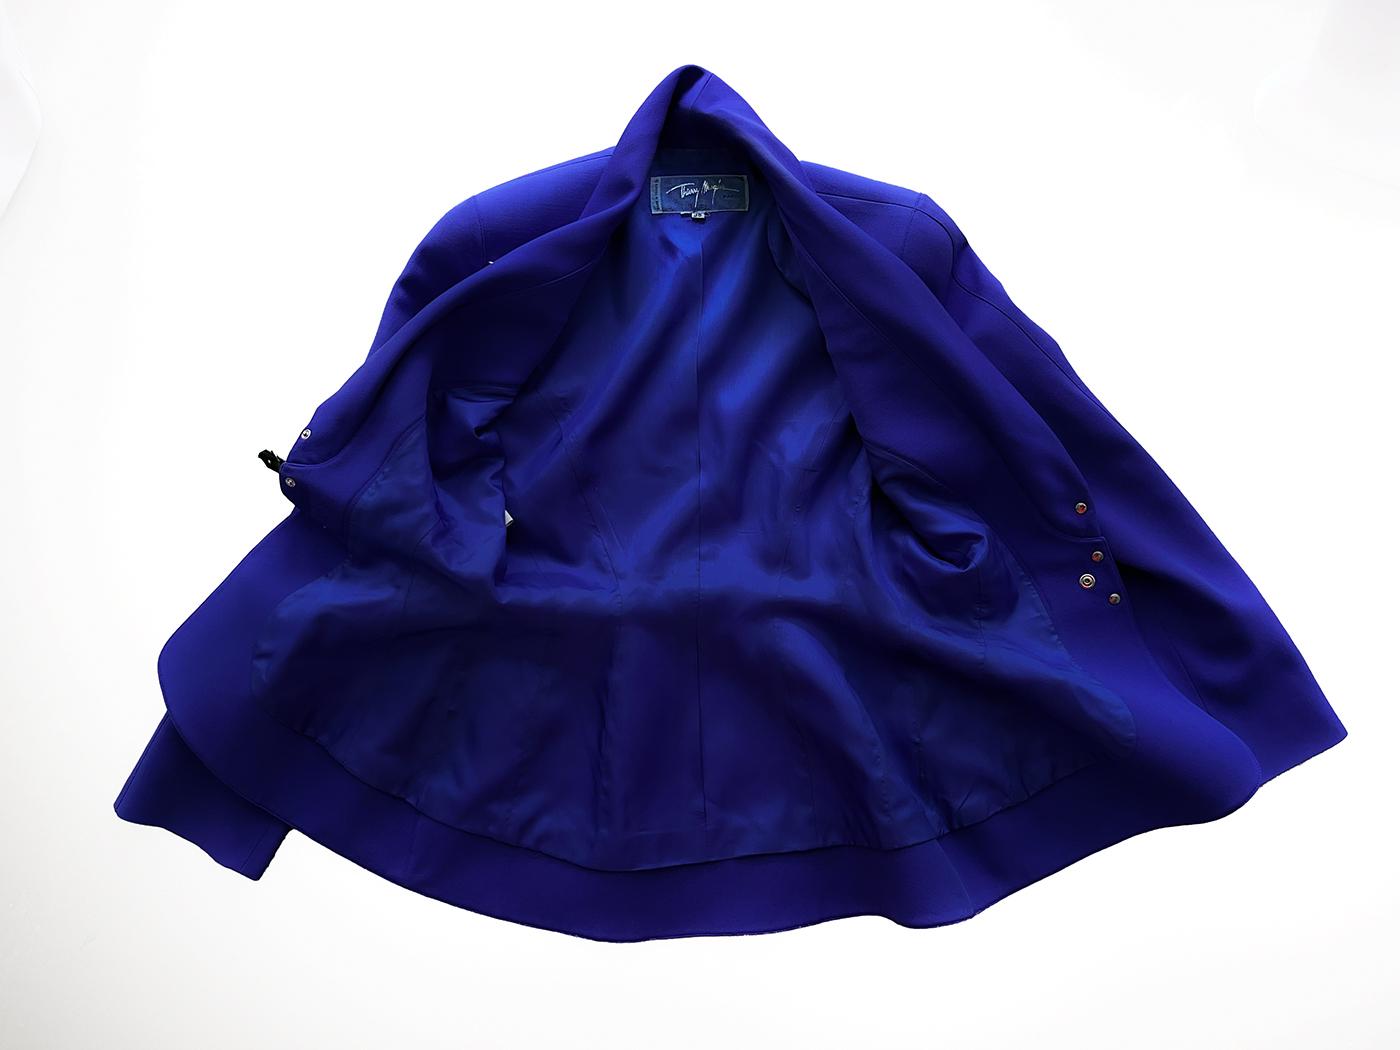 Thierry Mugler Archival FW 1996 Skirt Suit Blue Metal Arrows Jacket Skirt For Sale 6